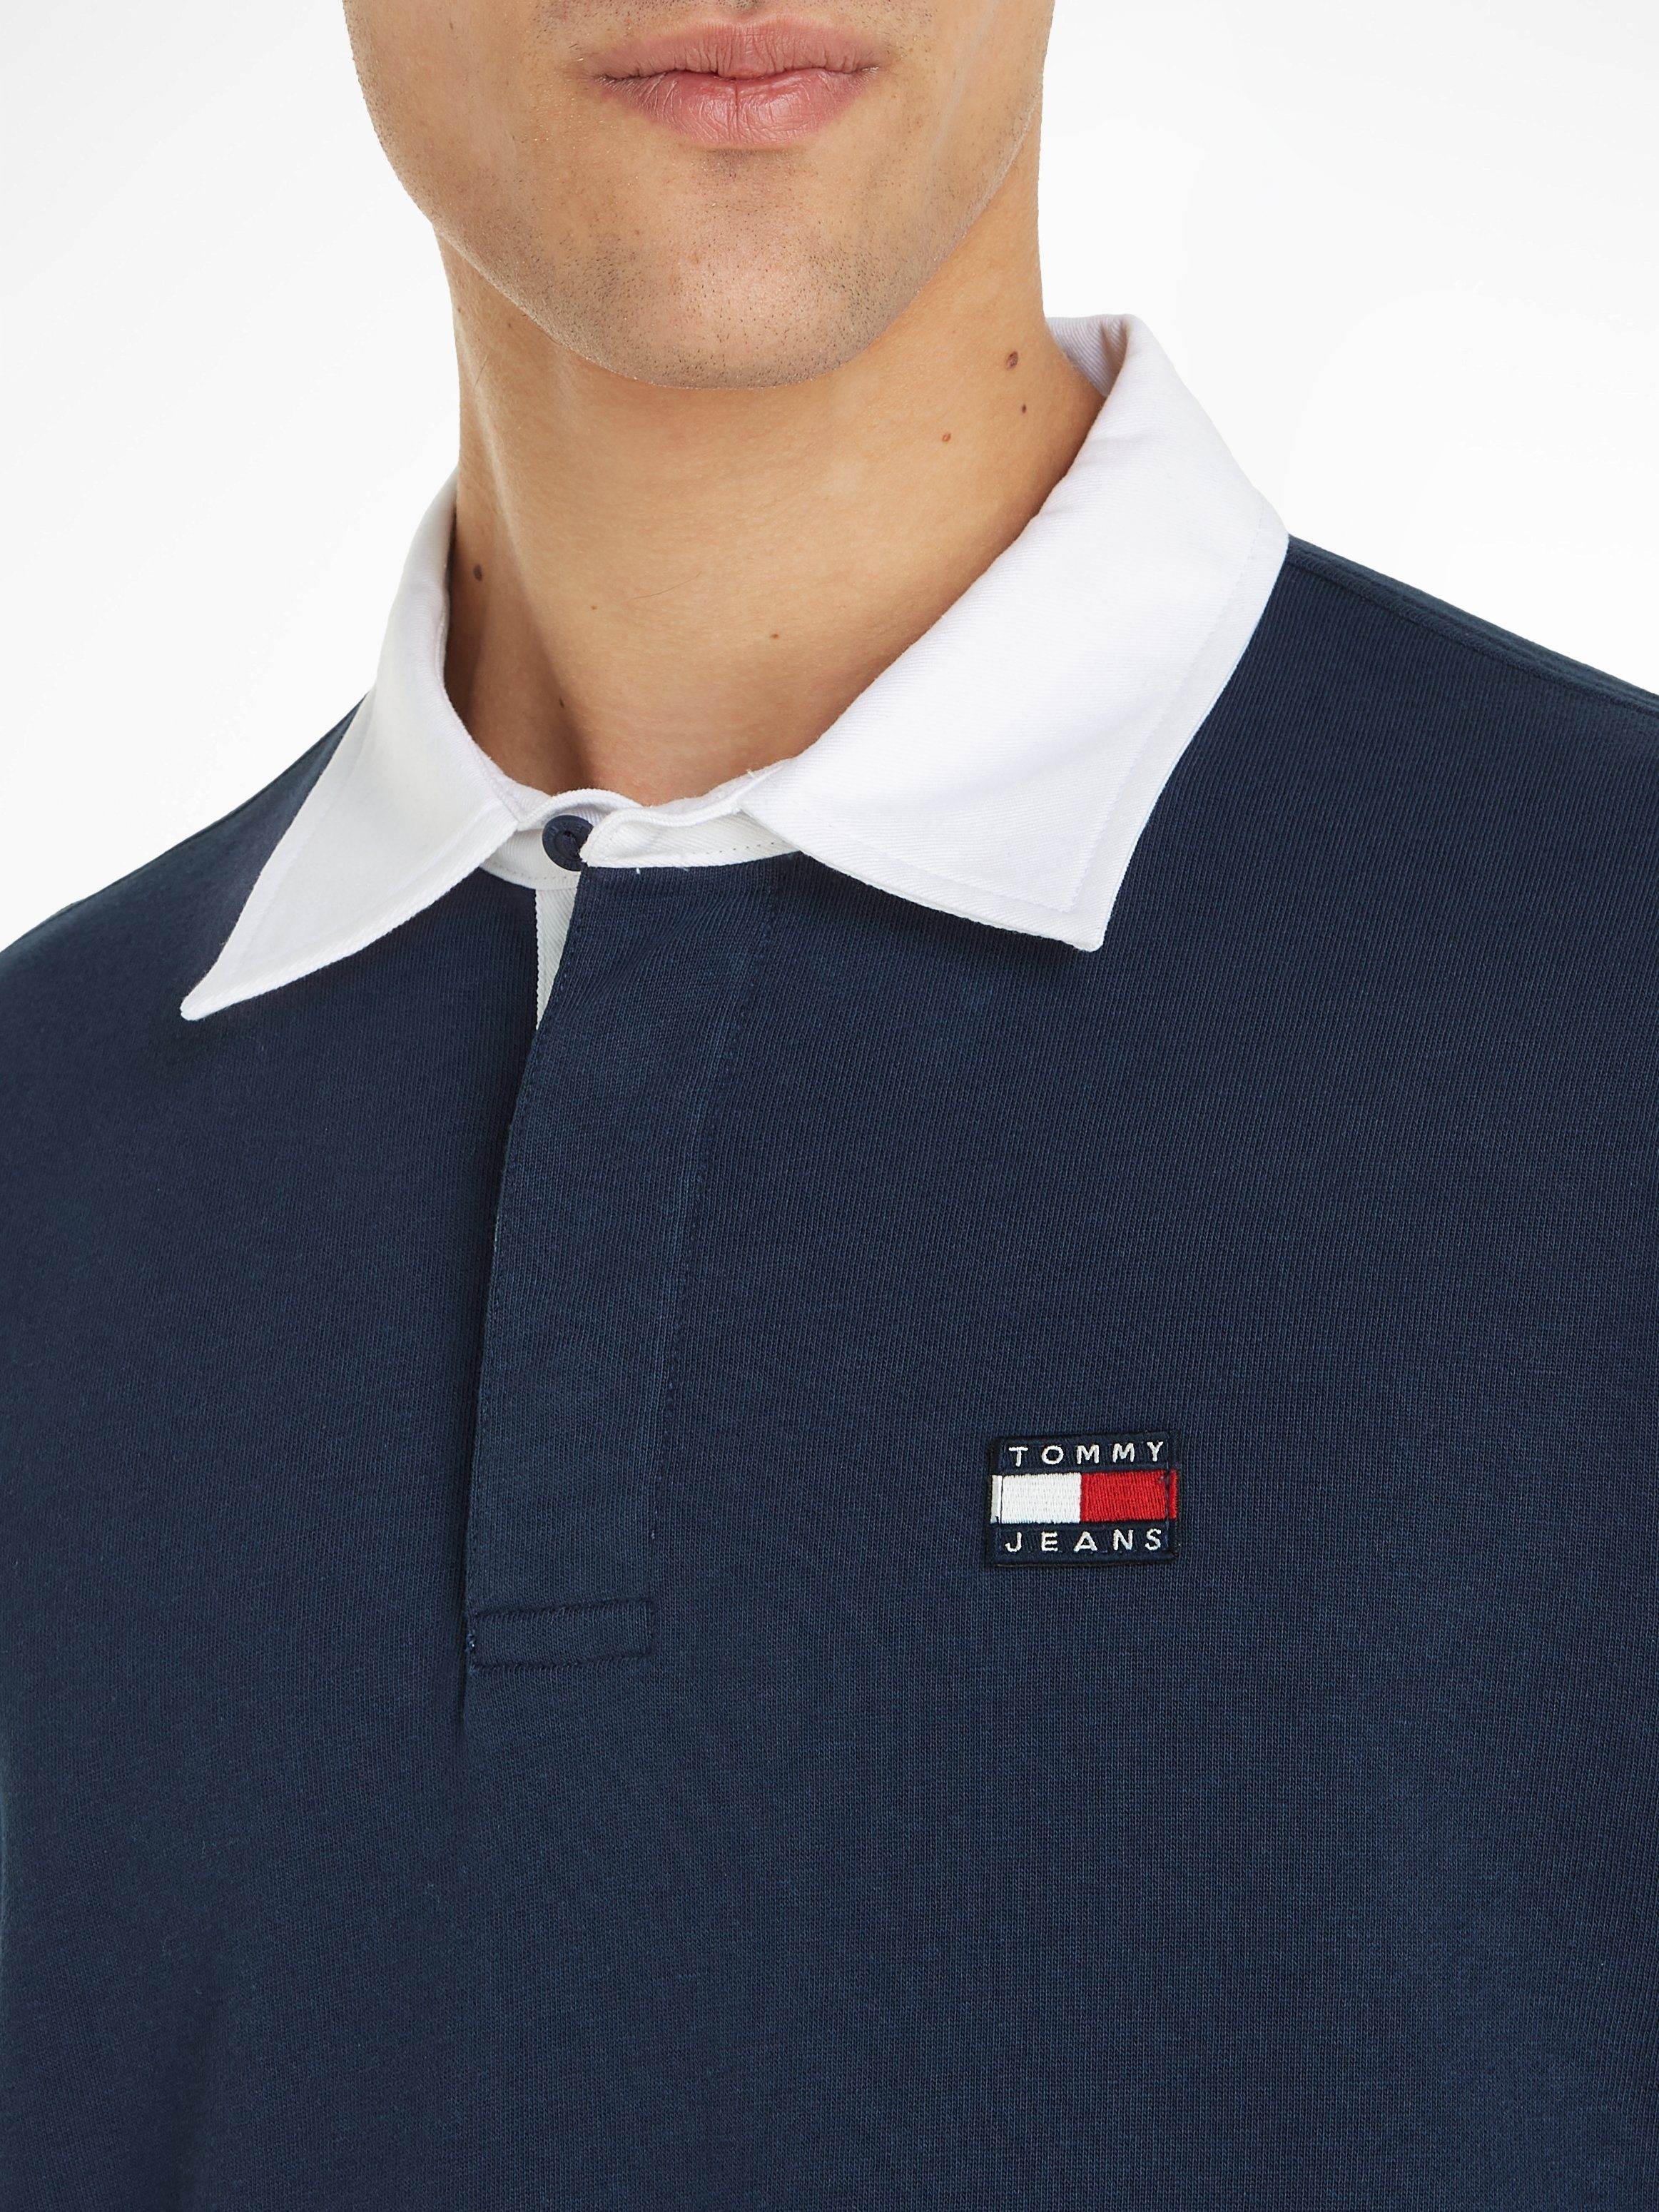 BADGE Langarm-Poloshirt RUGBY Twilight Navy Tommy TJM Jeans